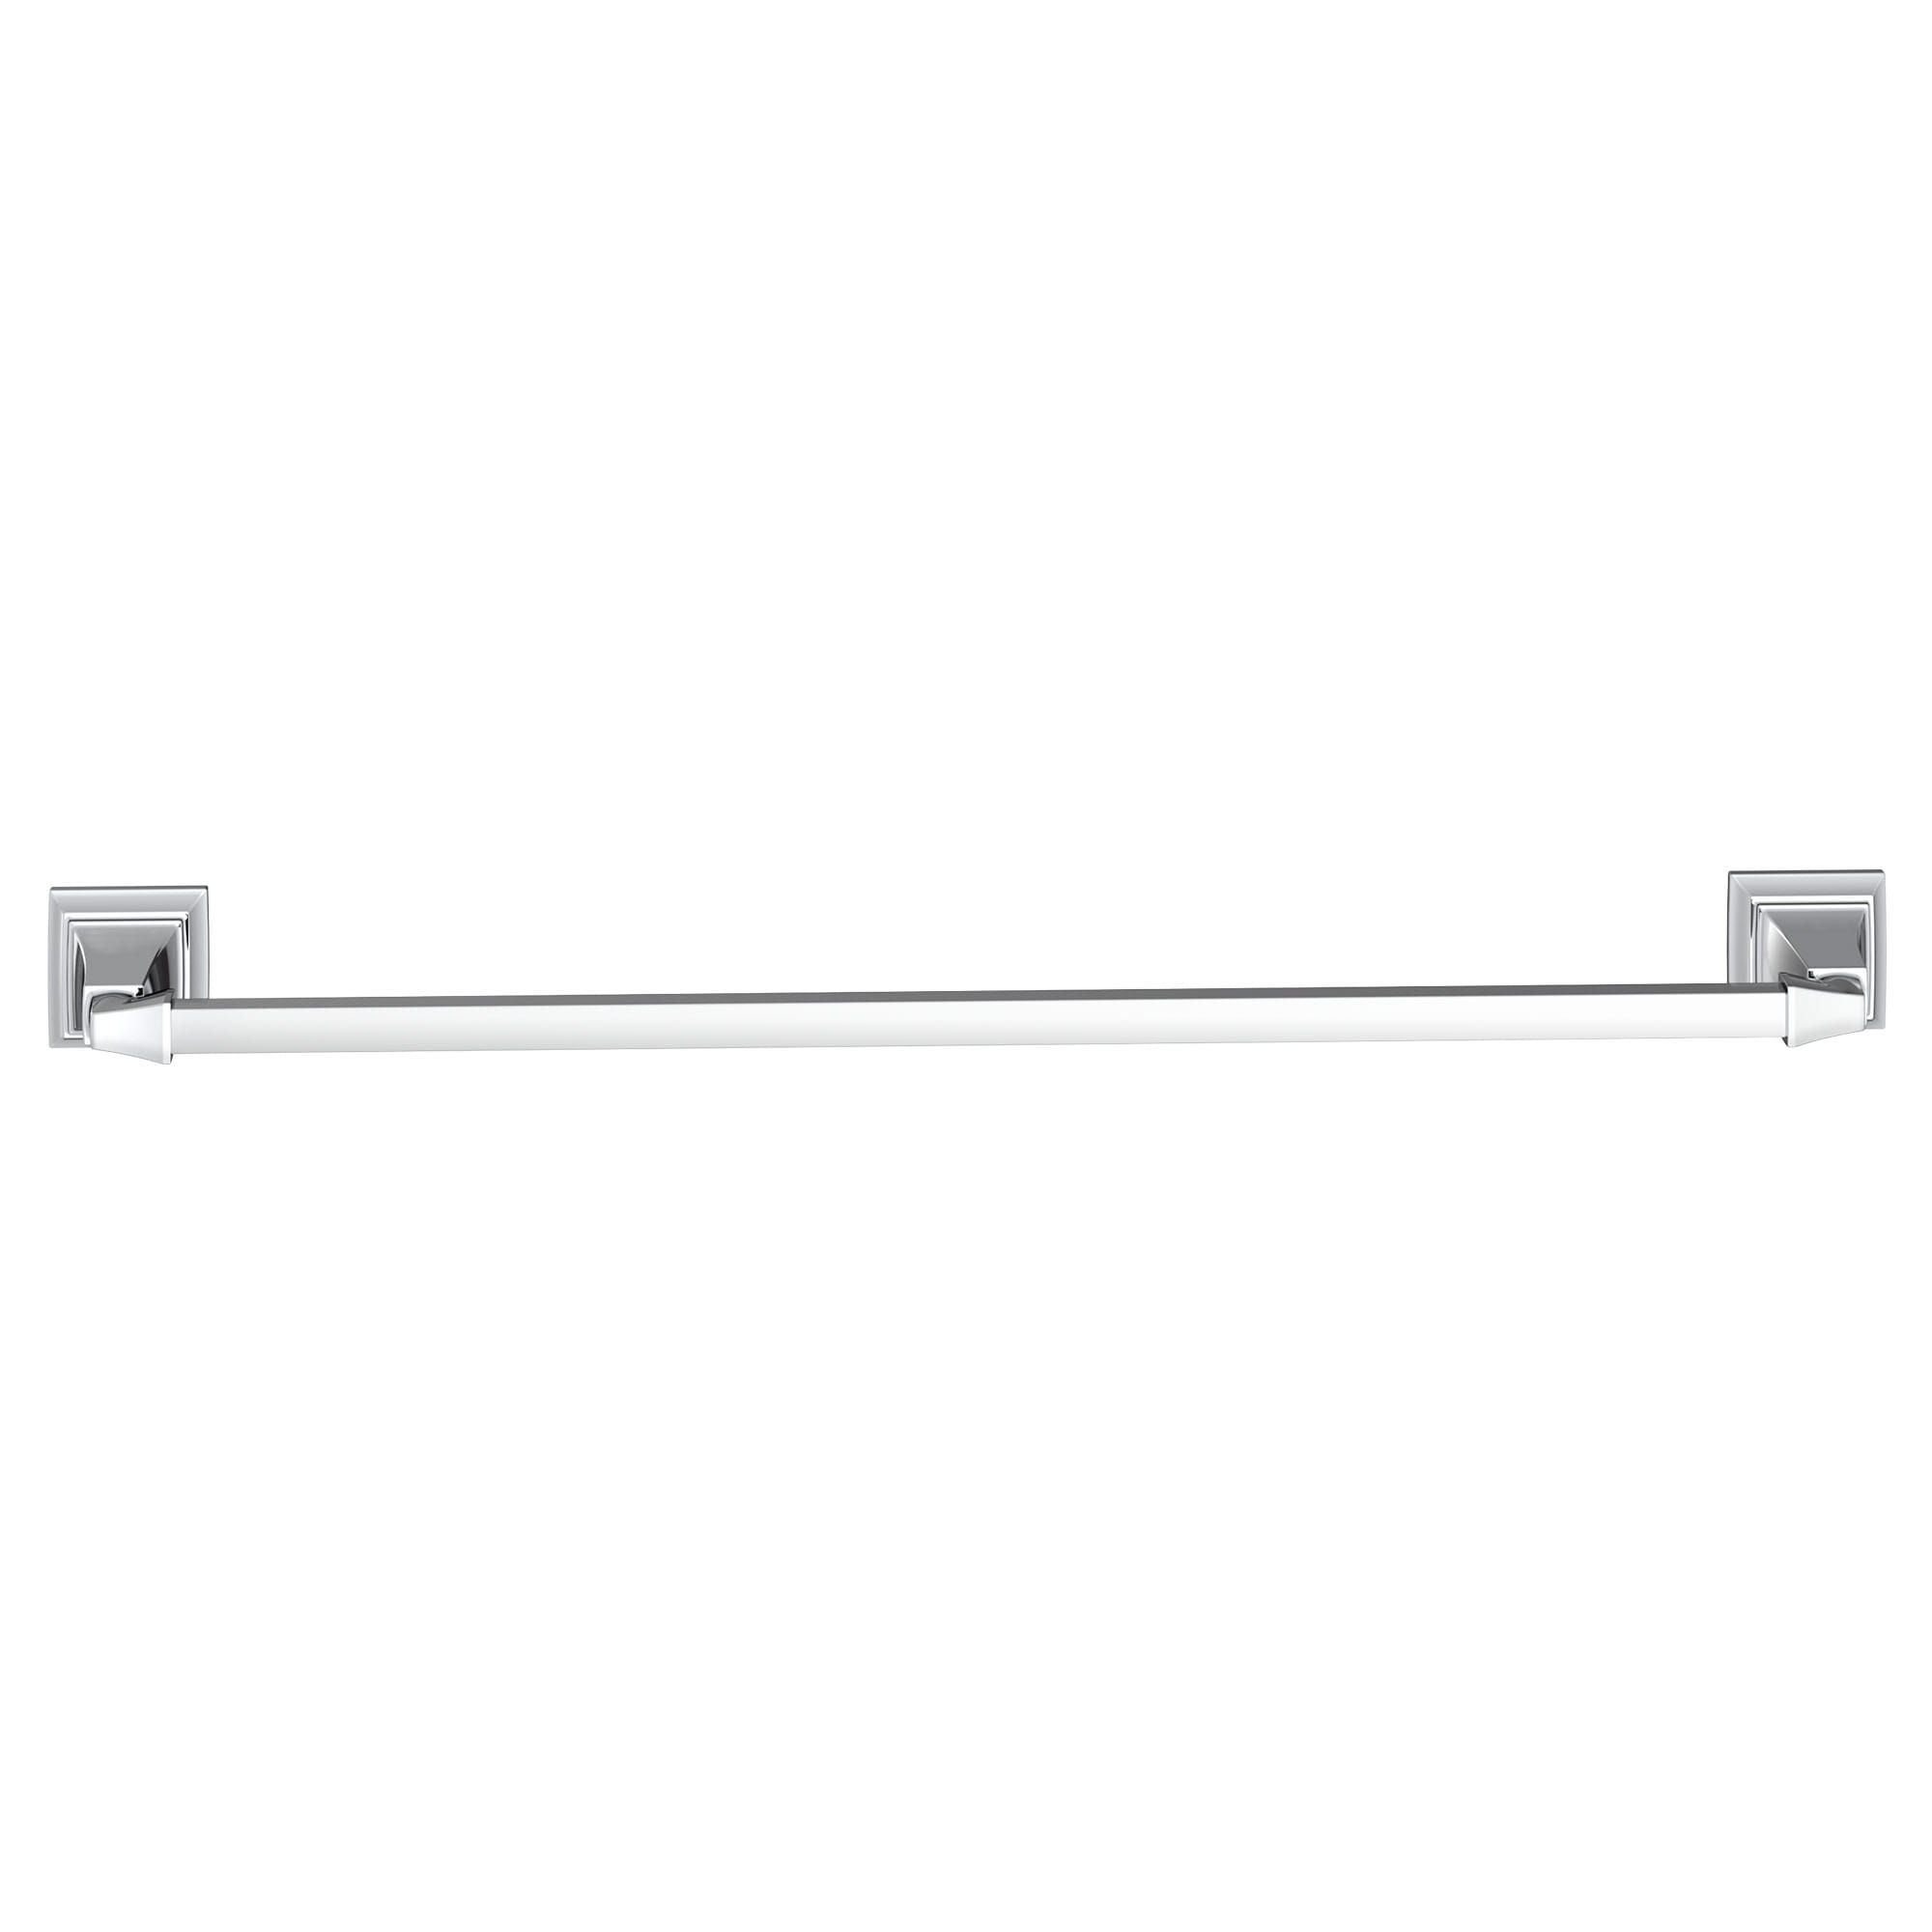 Town Square S 24 Inch Towel Bar CHROME